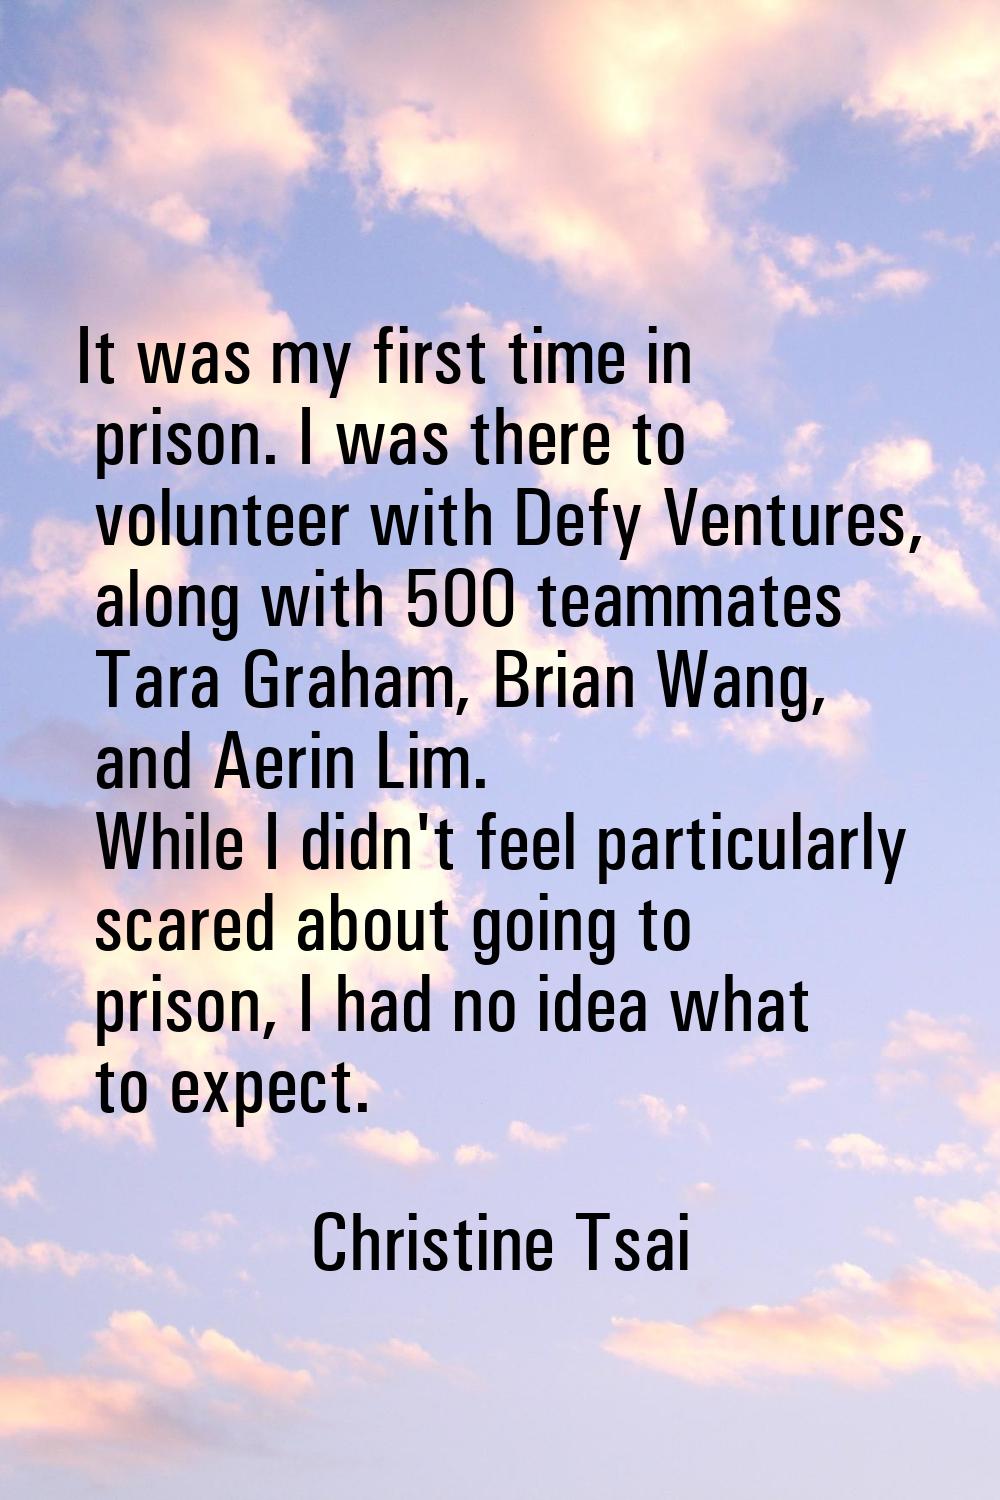 It was my first time in prison. I was there to volunteer with Defy Ventures, along with 500 teammat